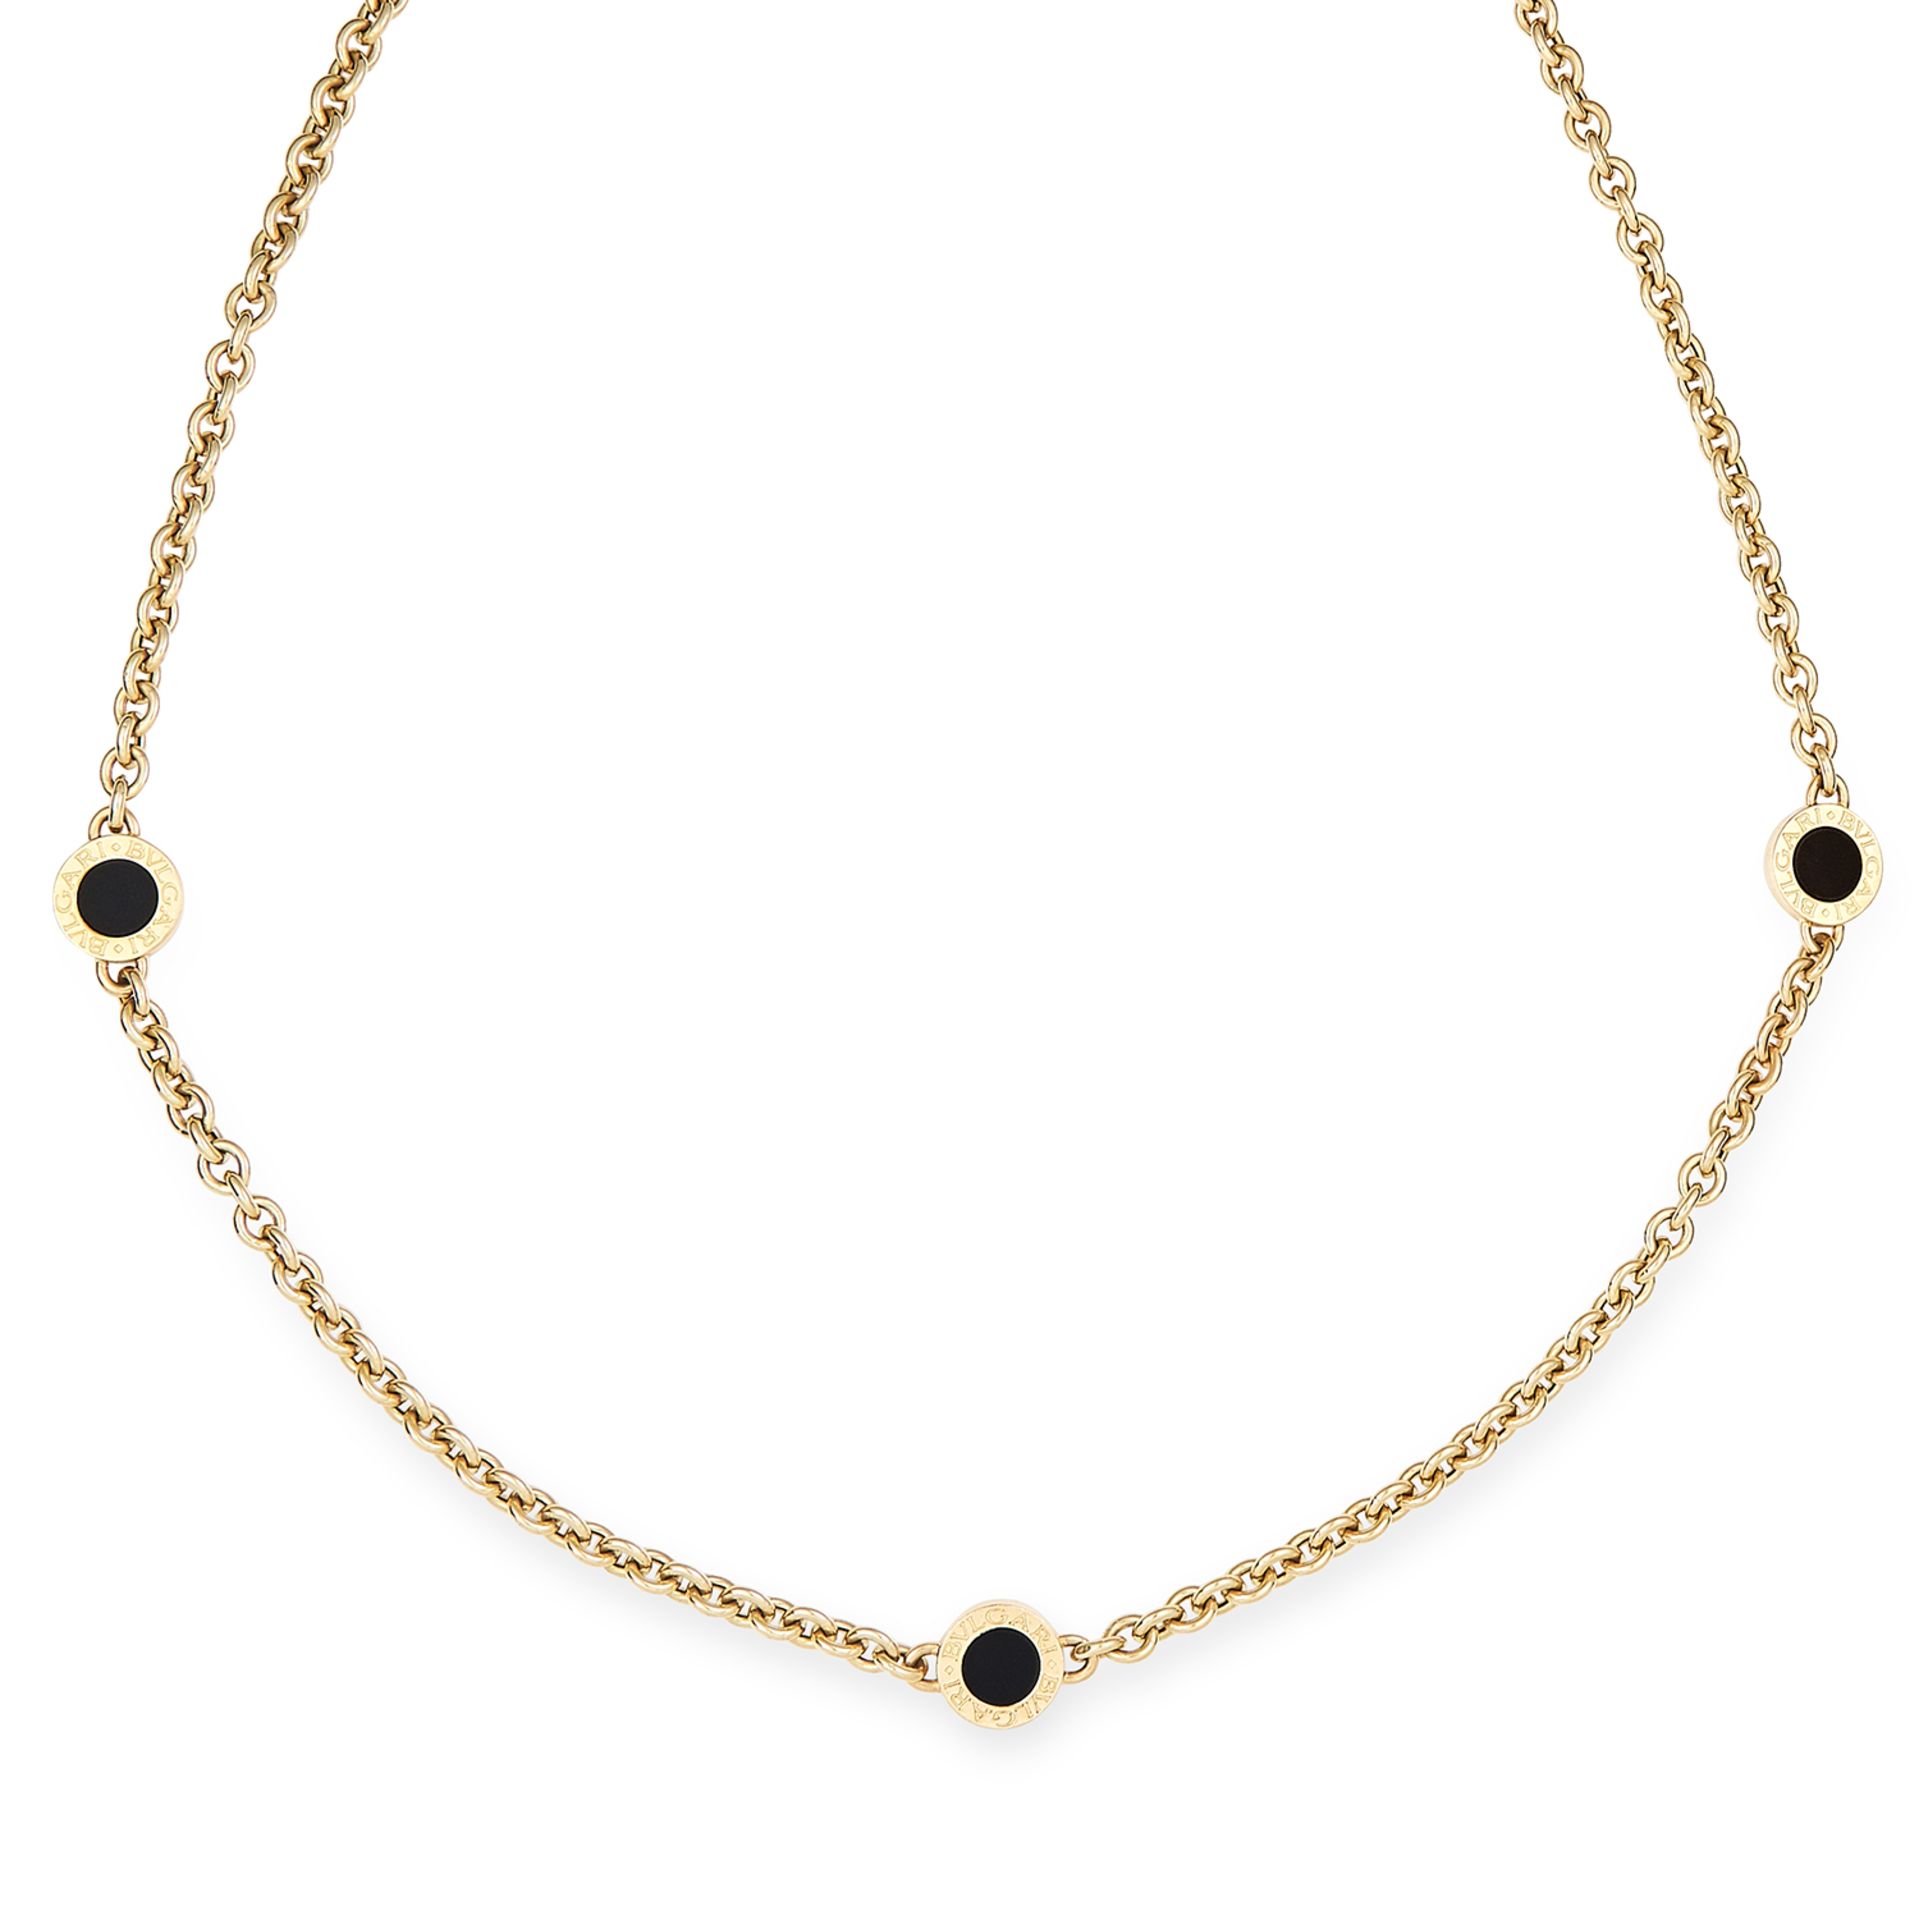 ONYX LINK NECKLACE, BULGARI in 18ct yellow gold, comprising of six onyx Bvlgari links signed